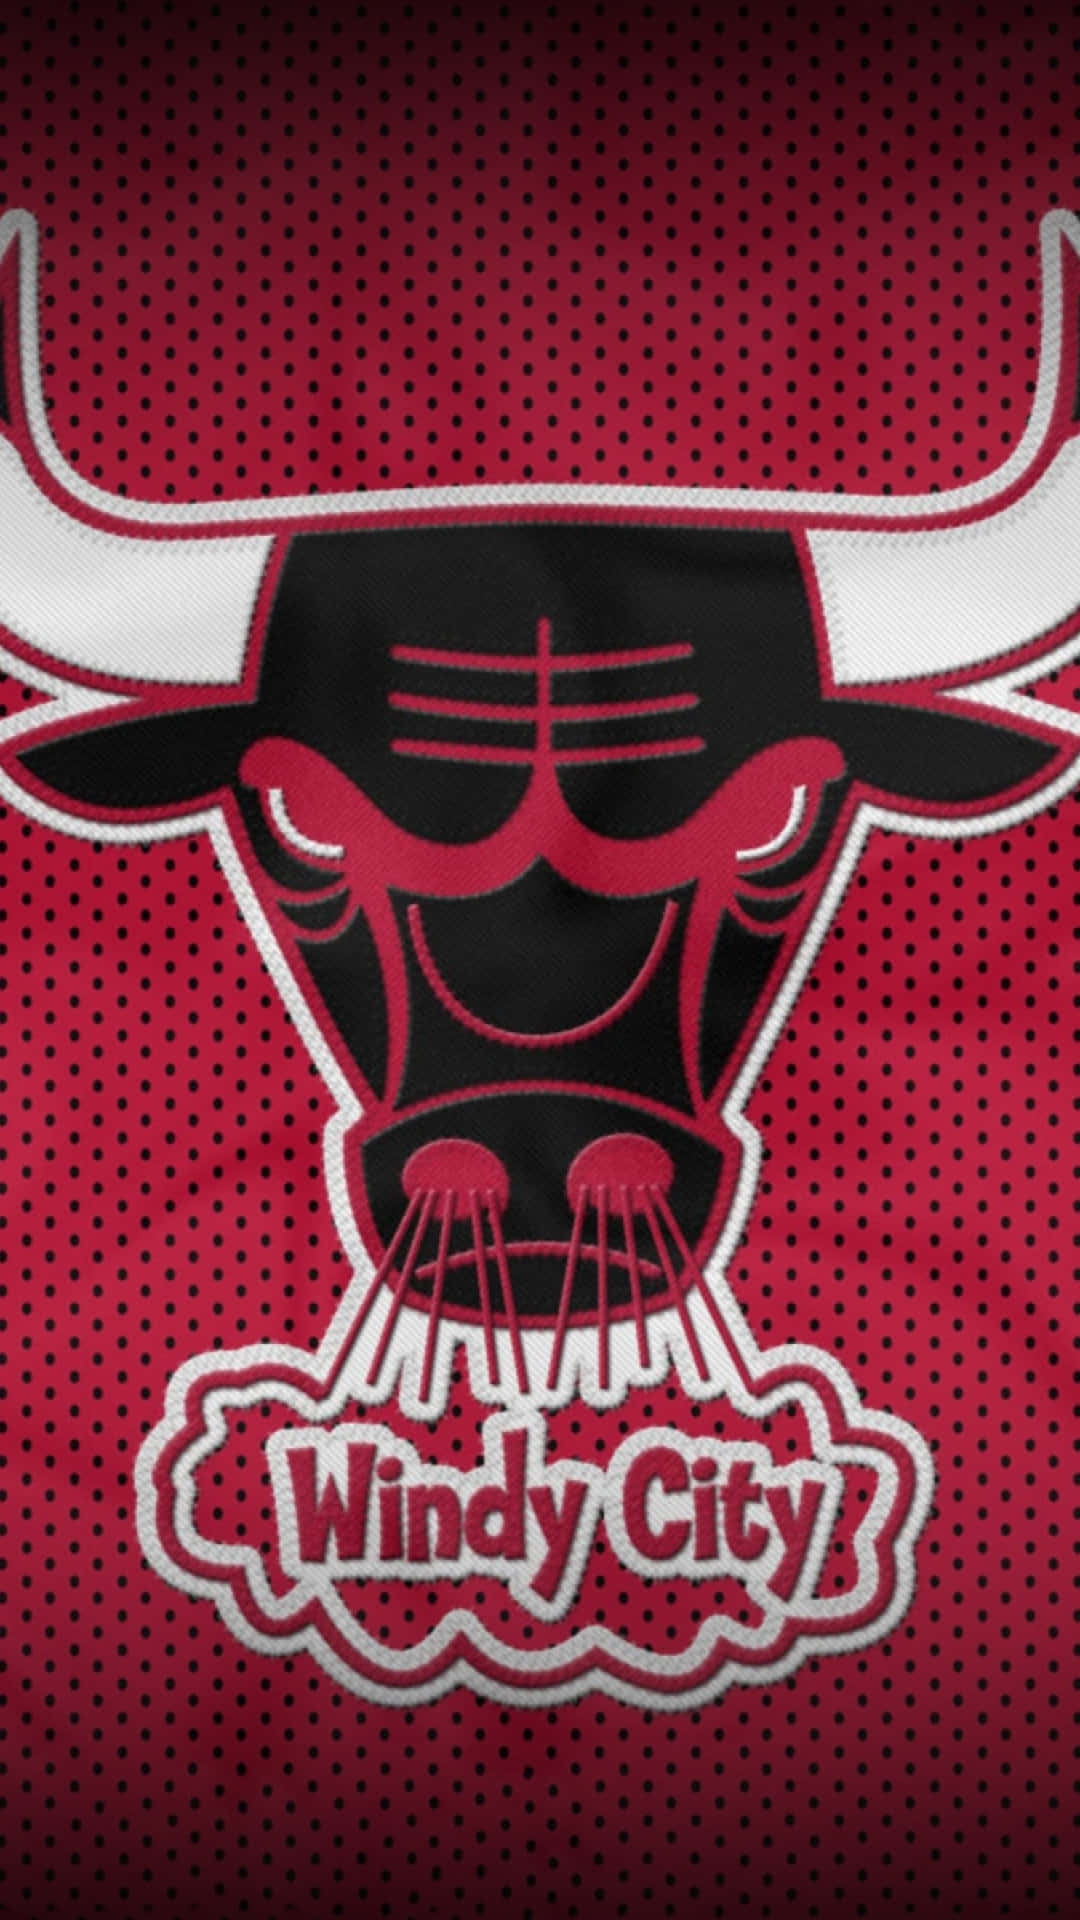 Support Your Team – Get The Chicago Bulls Iphone Background